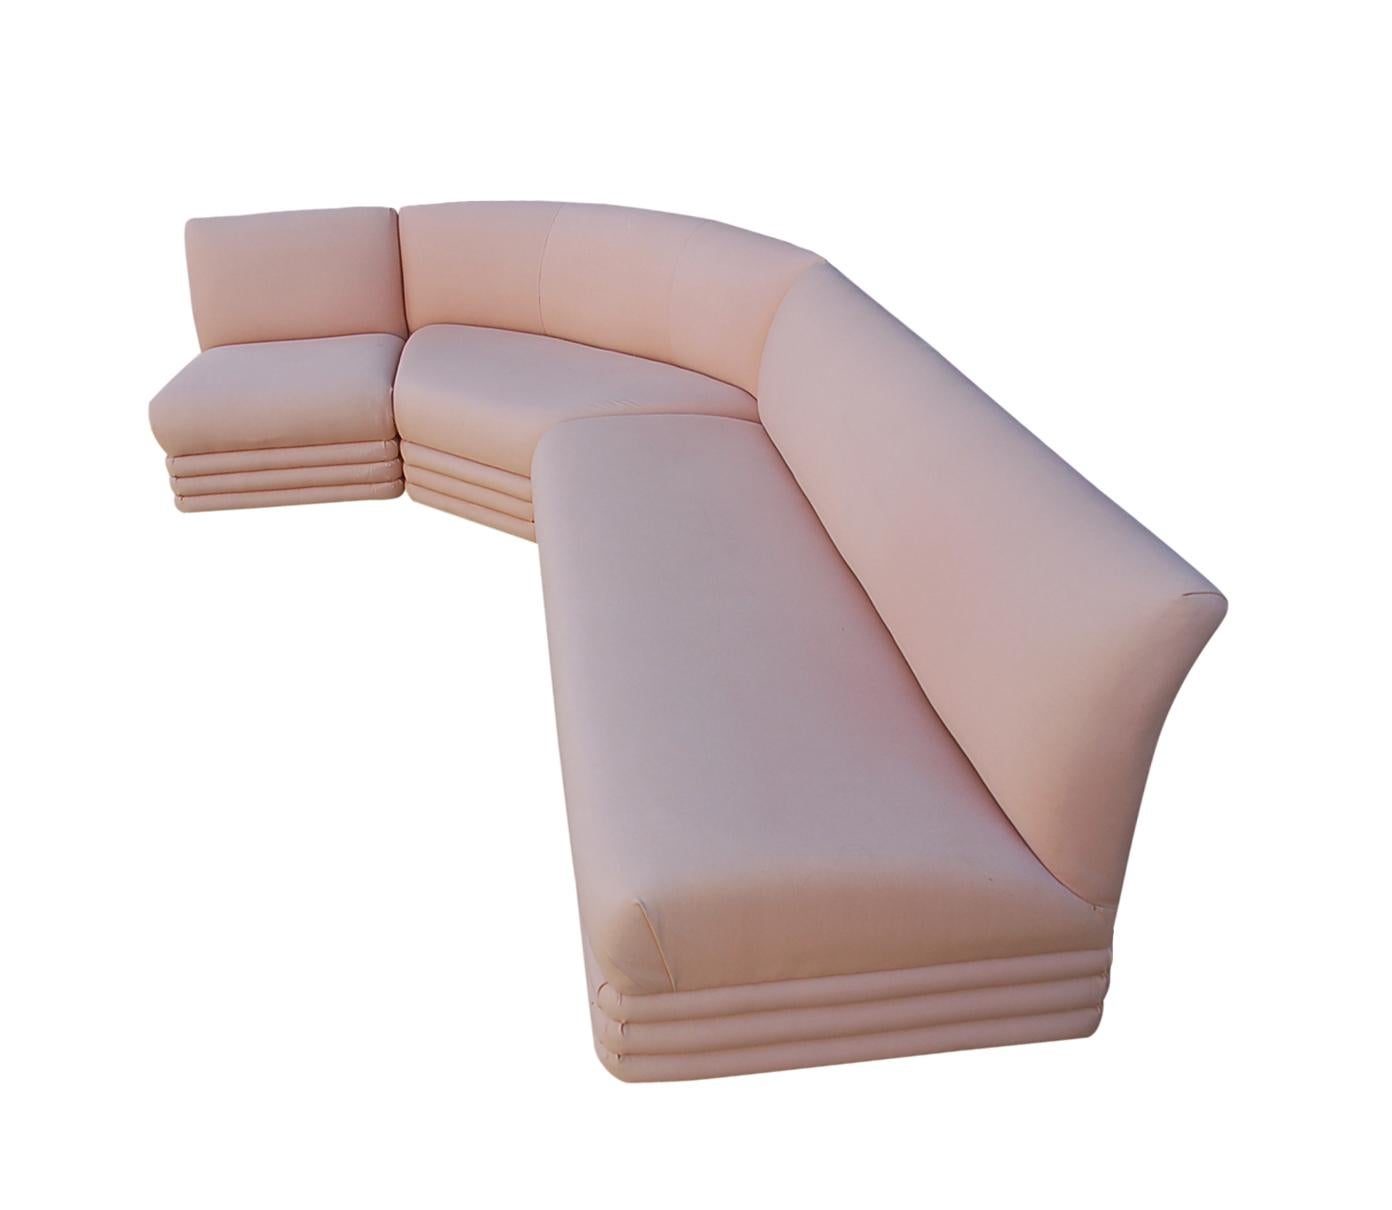 A long curved sectional sofa in original blush pink linen. It features 3 separate sections in Art Deco form.